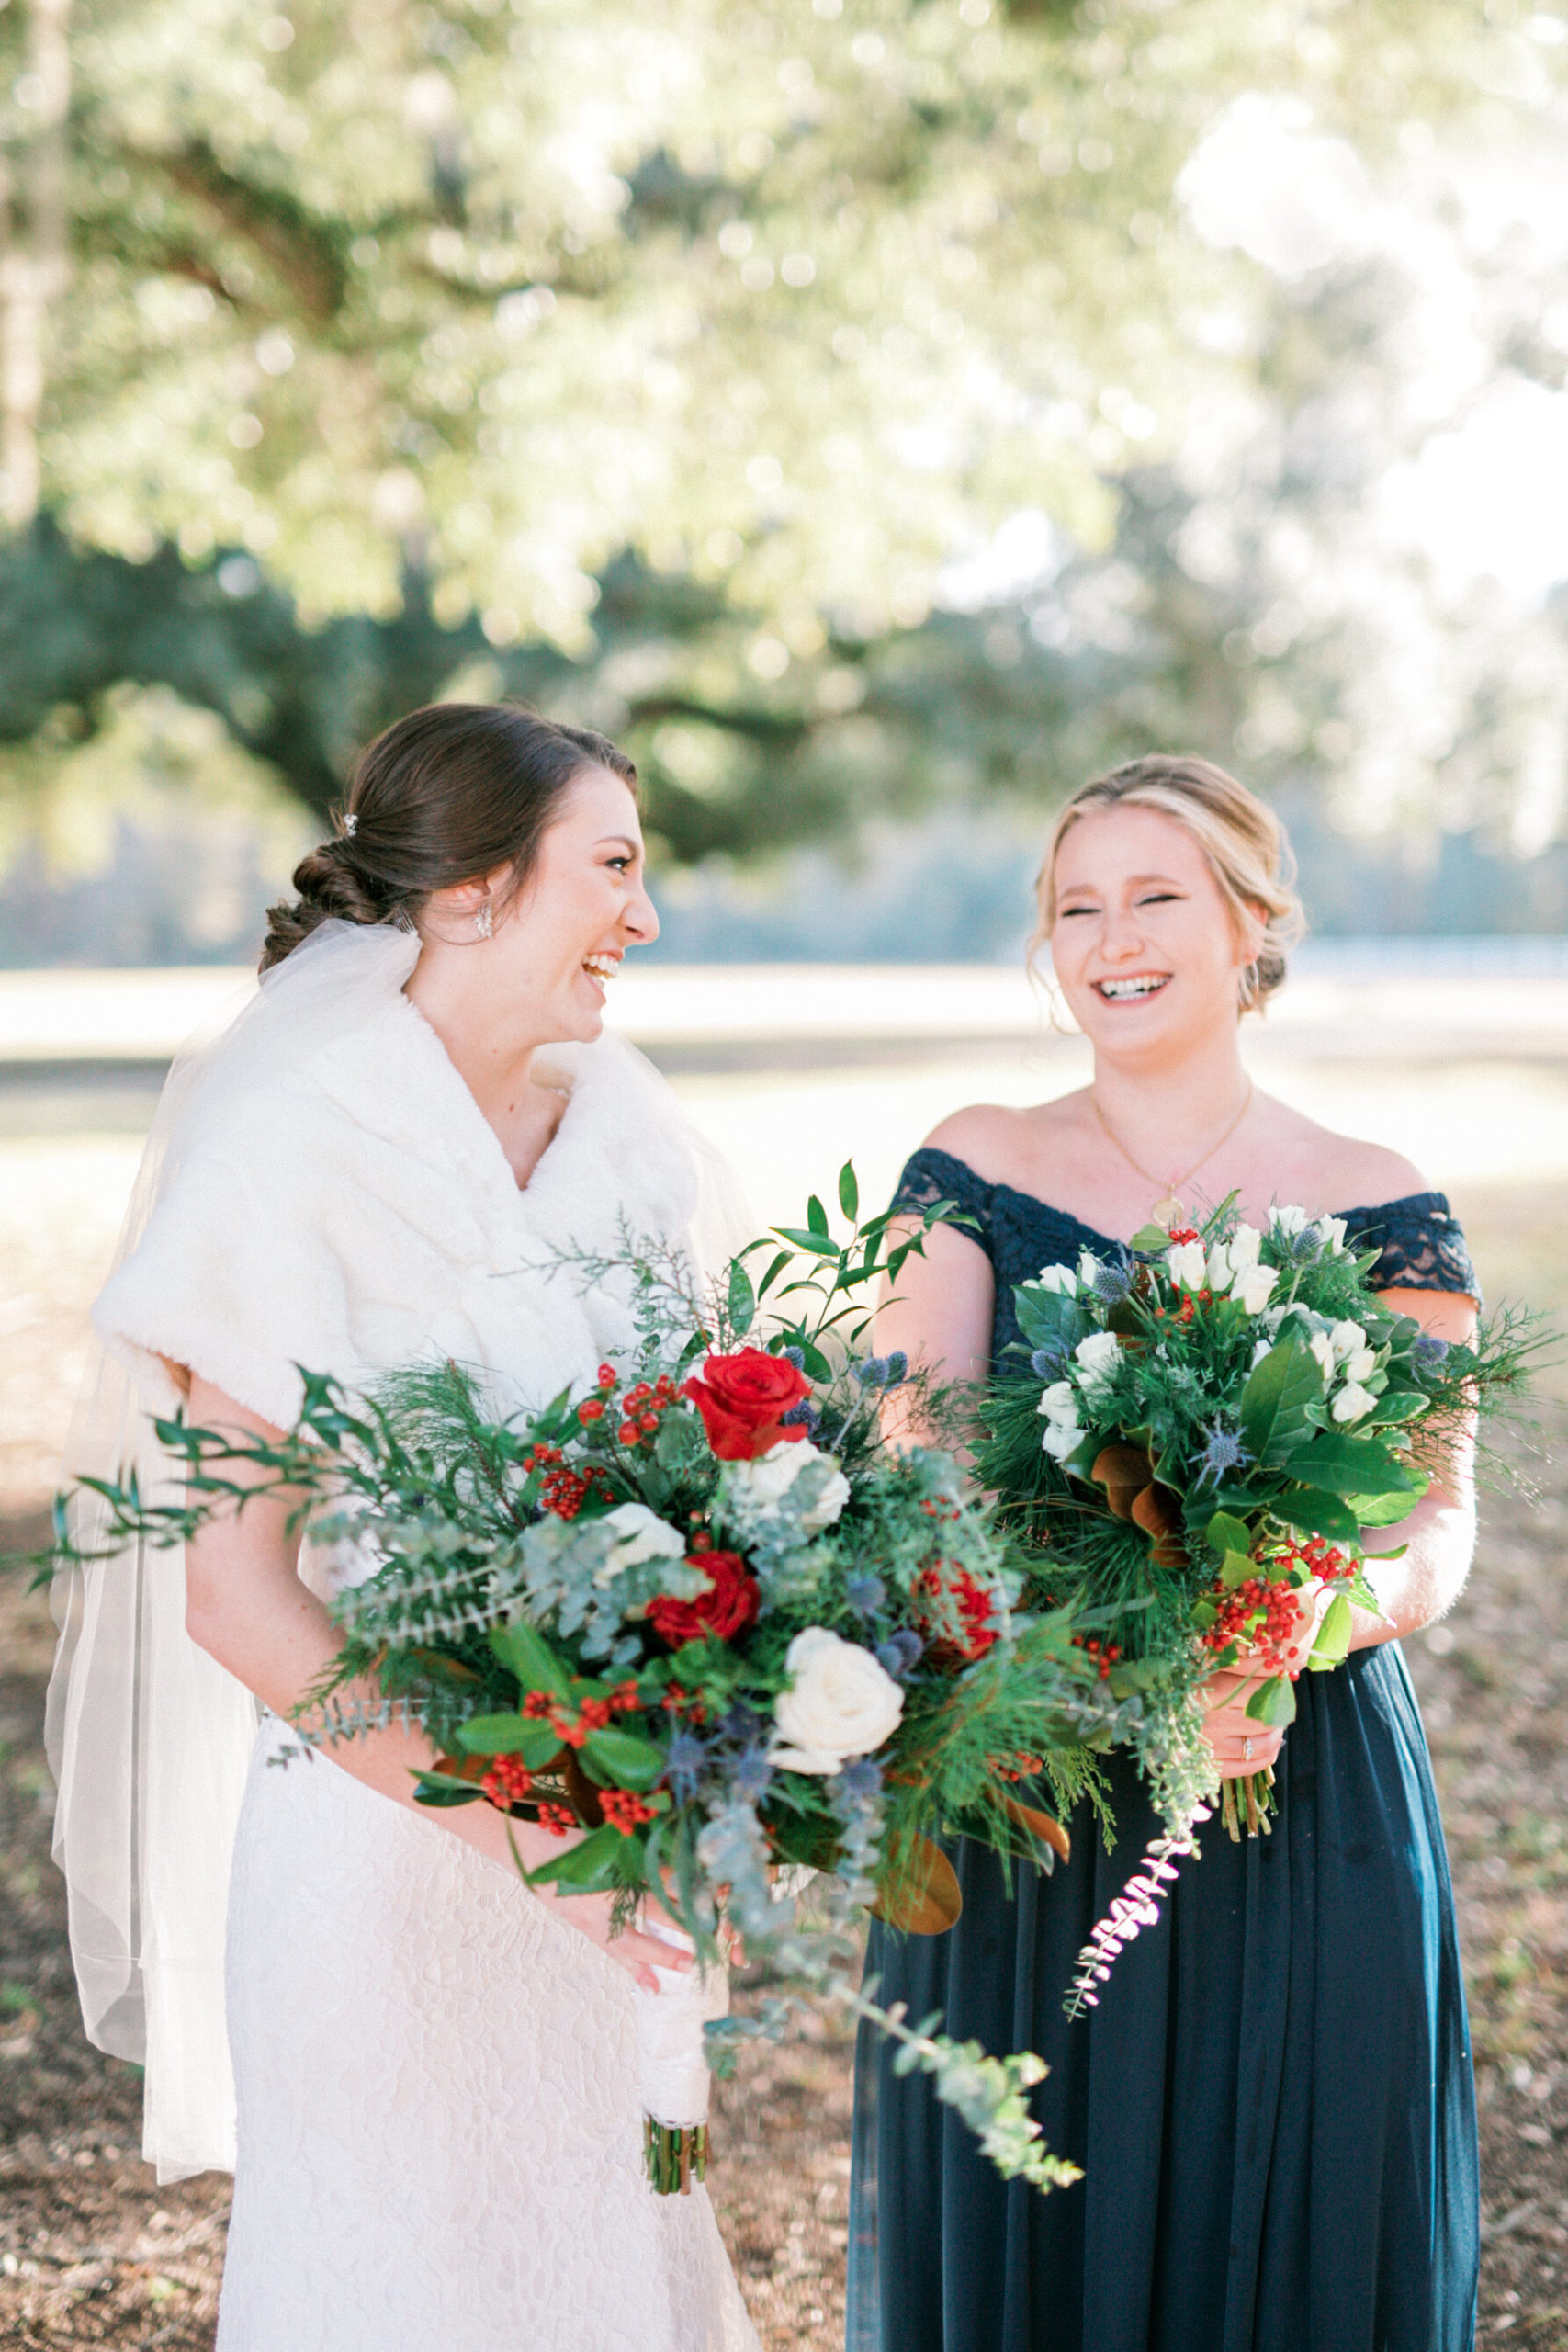 Maid of honor with the bride at luxury Charleston wedding.